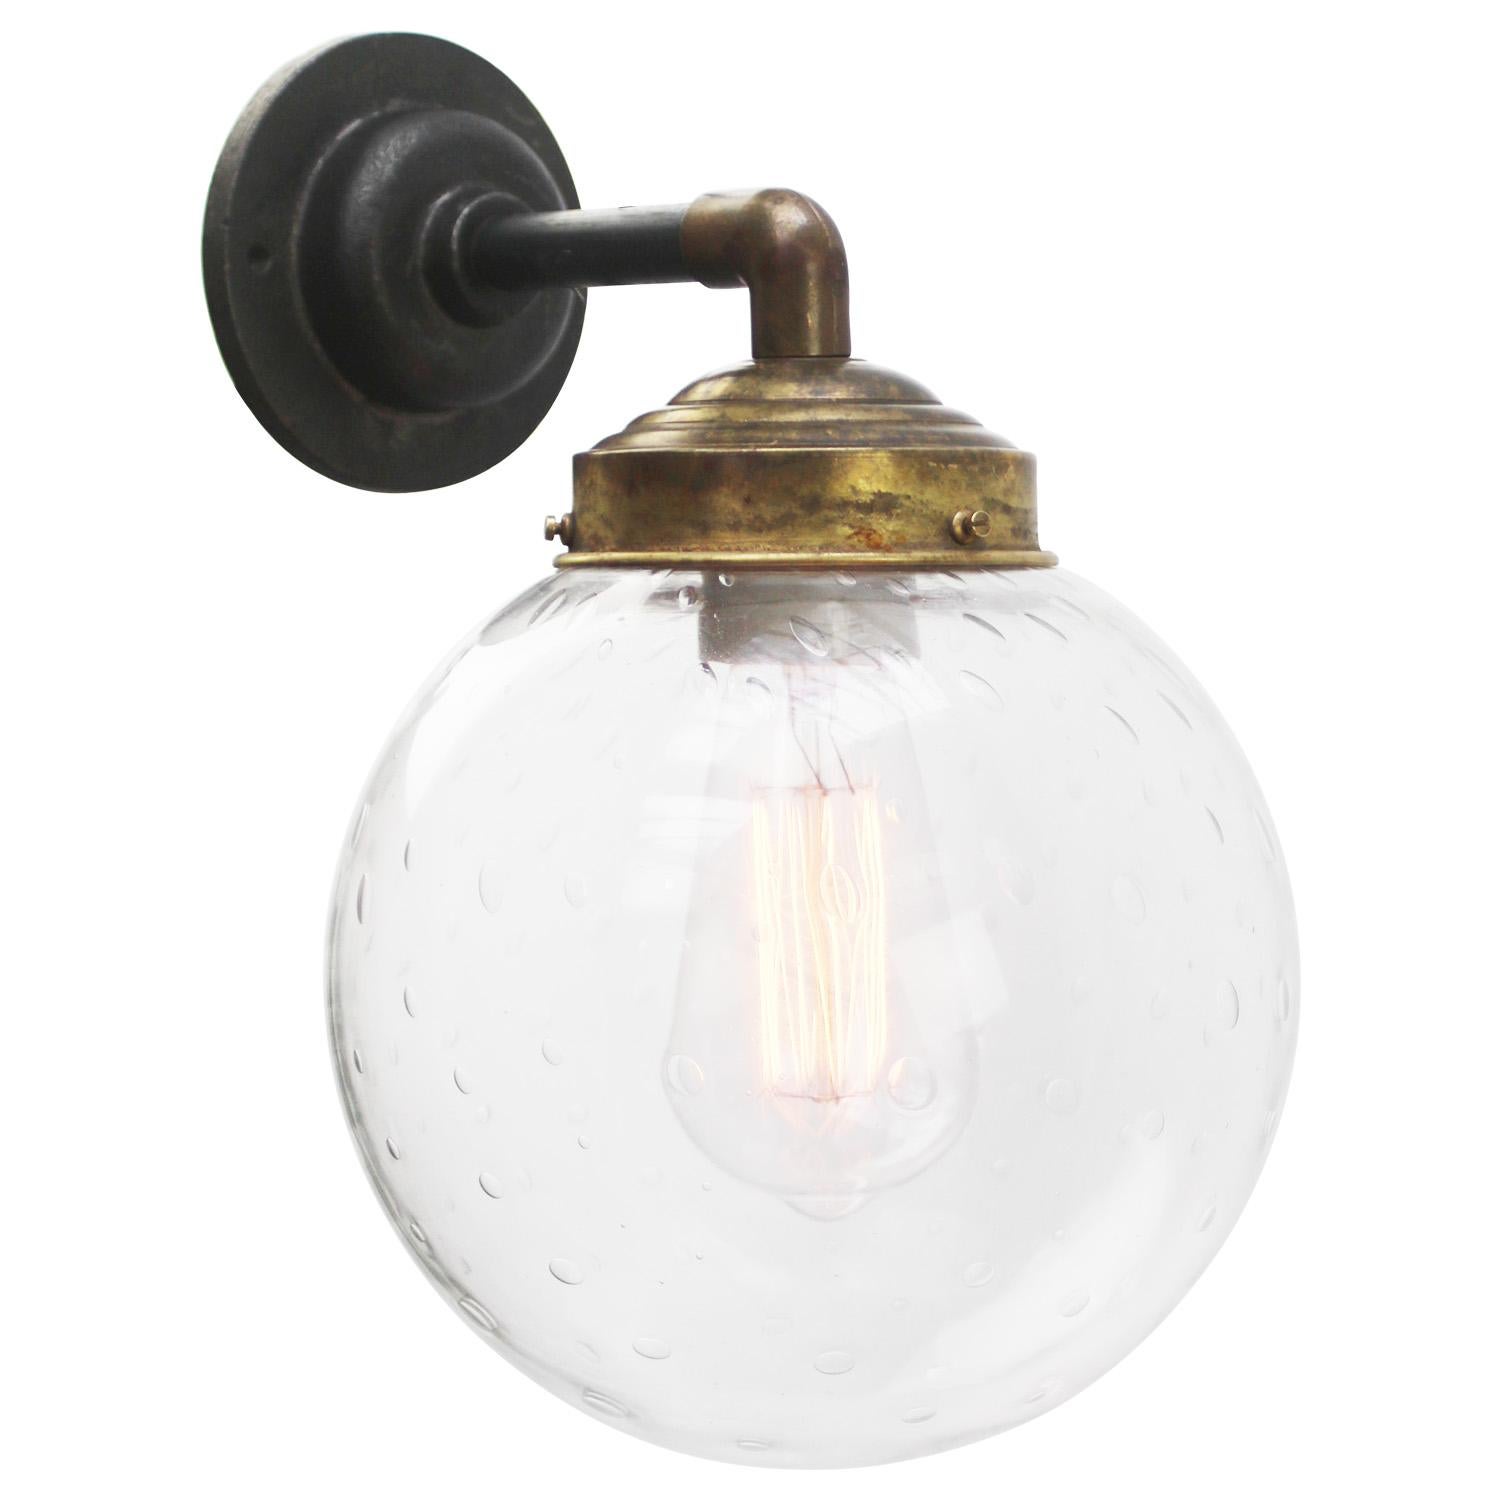 Brass and cast Iron Industrial wall light 
clear air bubble glass globe

Diameter cast iron wall piece: 10.5 cm / 4”, 2 holes to secure

Weight: 2.50 kg / 5.5 lb

Priced per individual item. All lamps have been made suitable by international